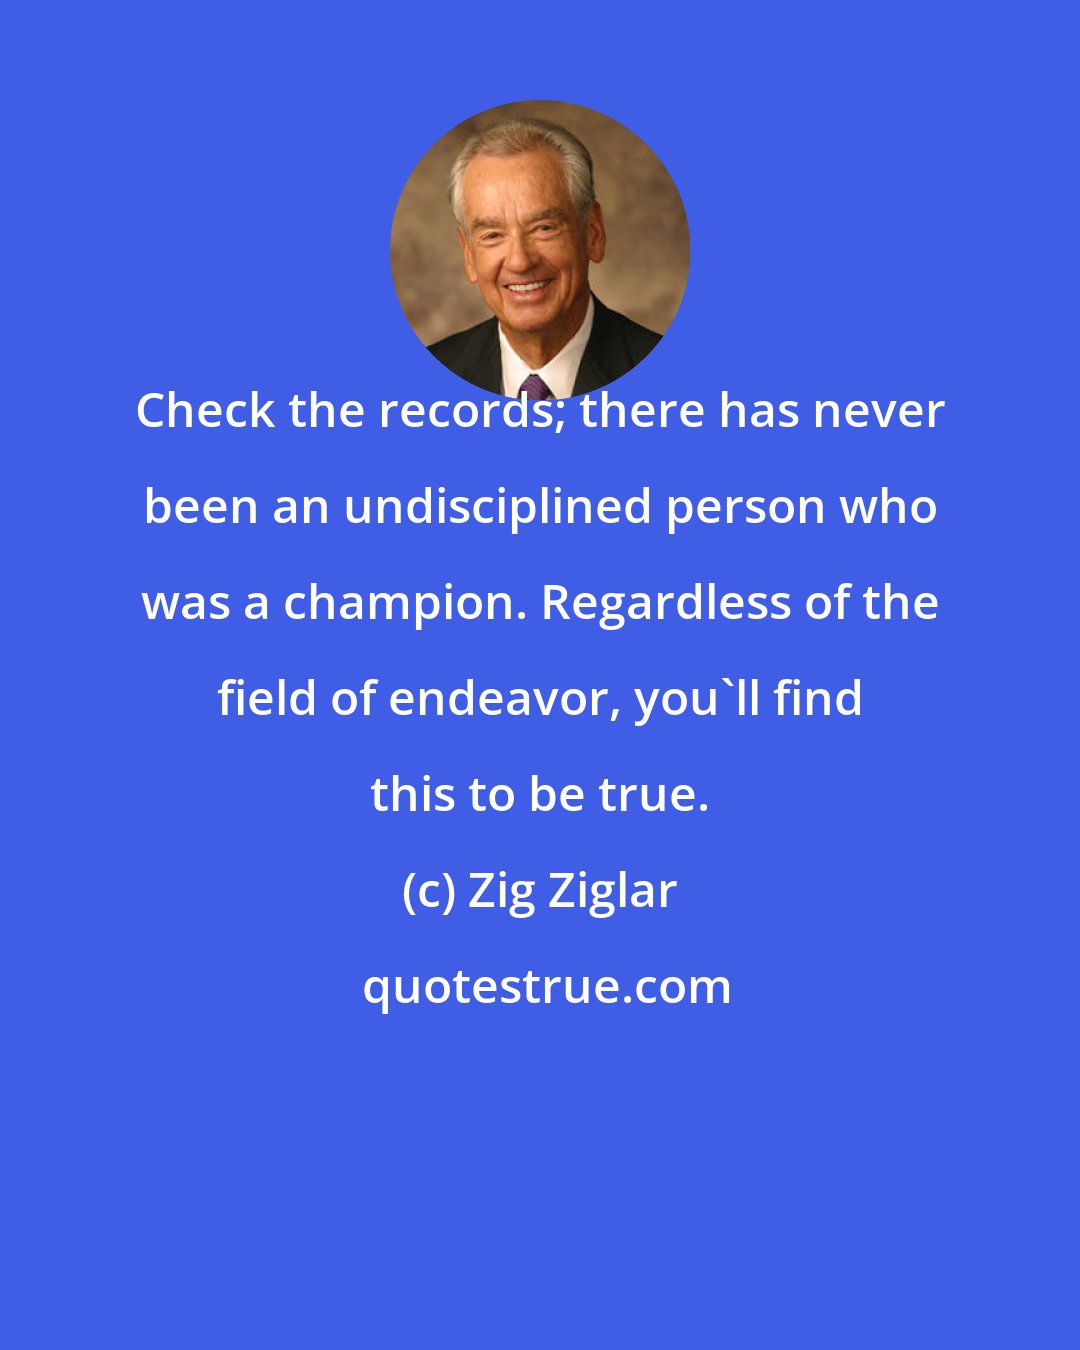 Zig Ziglar: Check the records; there has never been an undisciplined person who was a champion. Regardless of the field of endeavor, you'll find this to be true.